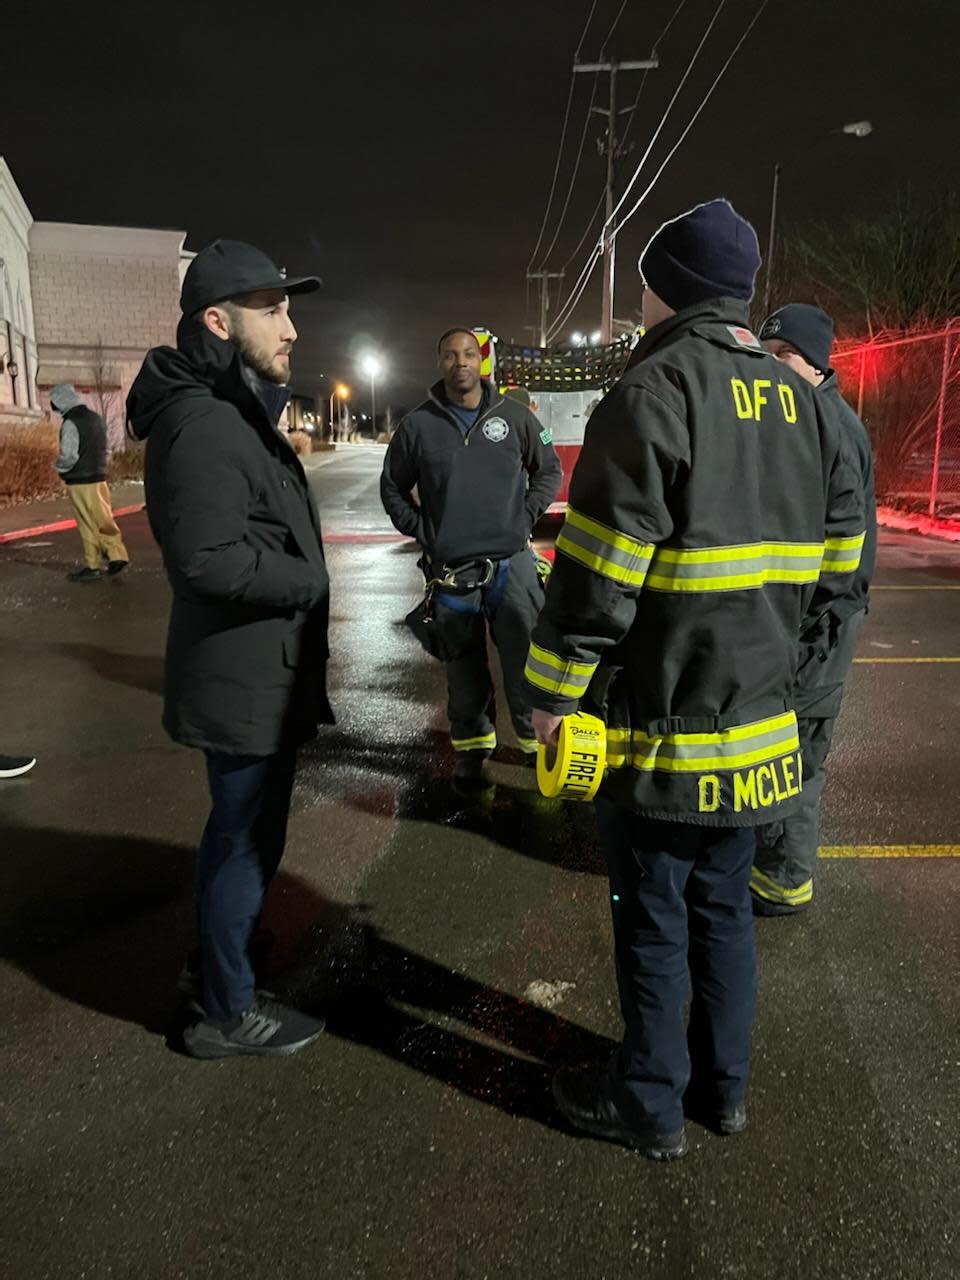 Dearborn Mayor Abdullah Hammoud speaks with Dearborn firefighters after a fire at Al-Huda Islamic Association, a mosque on Warren Avenue. Photo taken at 2:33 am. Dearborn Police said their officers fatally shot a man in Detroit they had encountered near the mosque after he fired at officers.